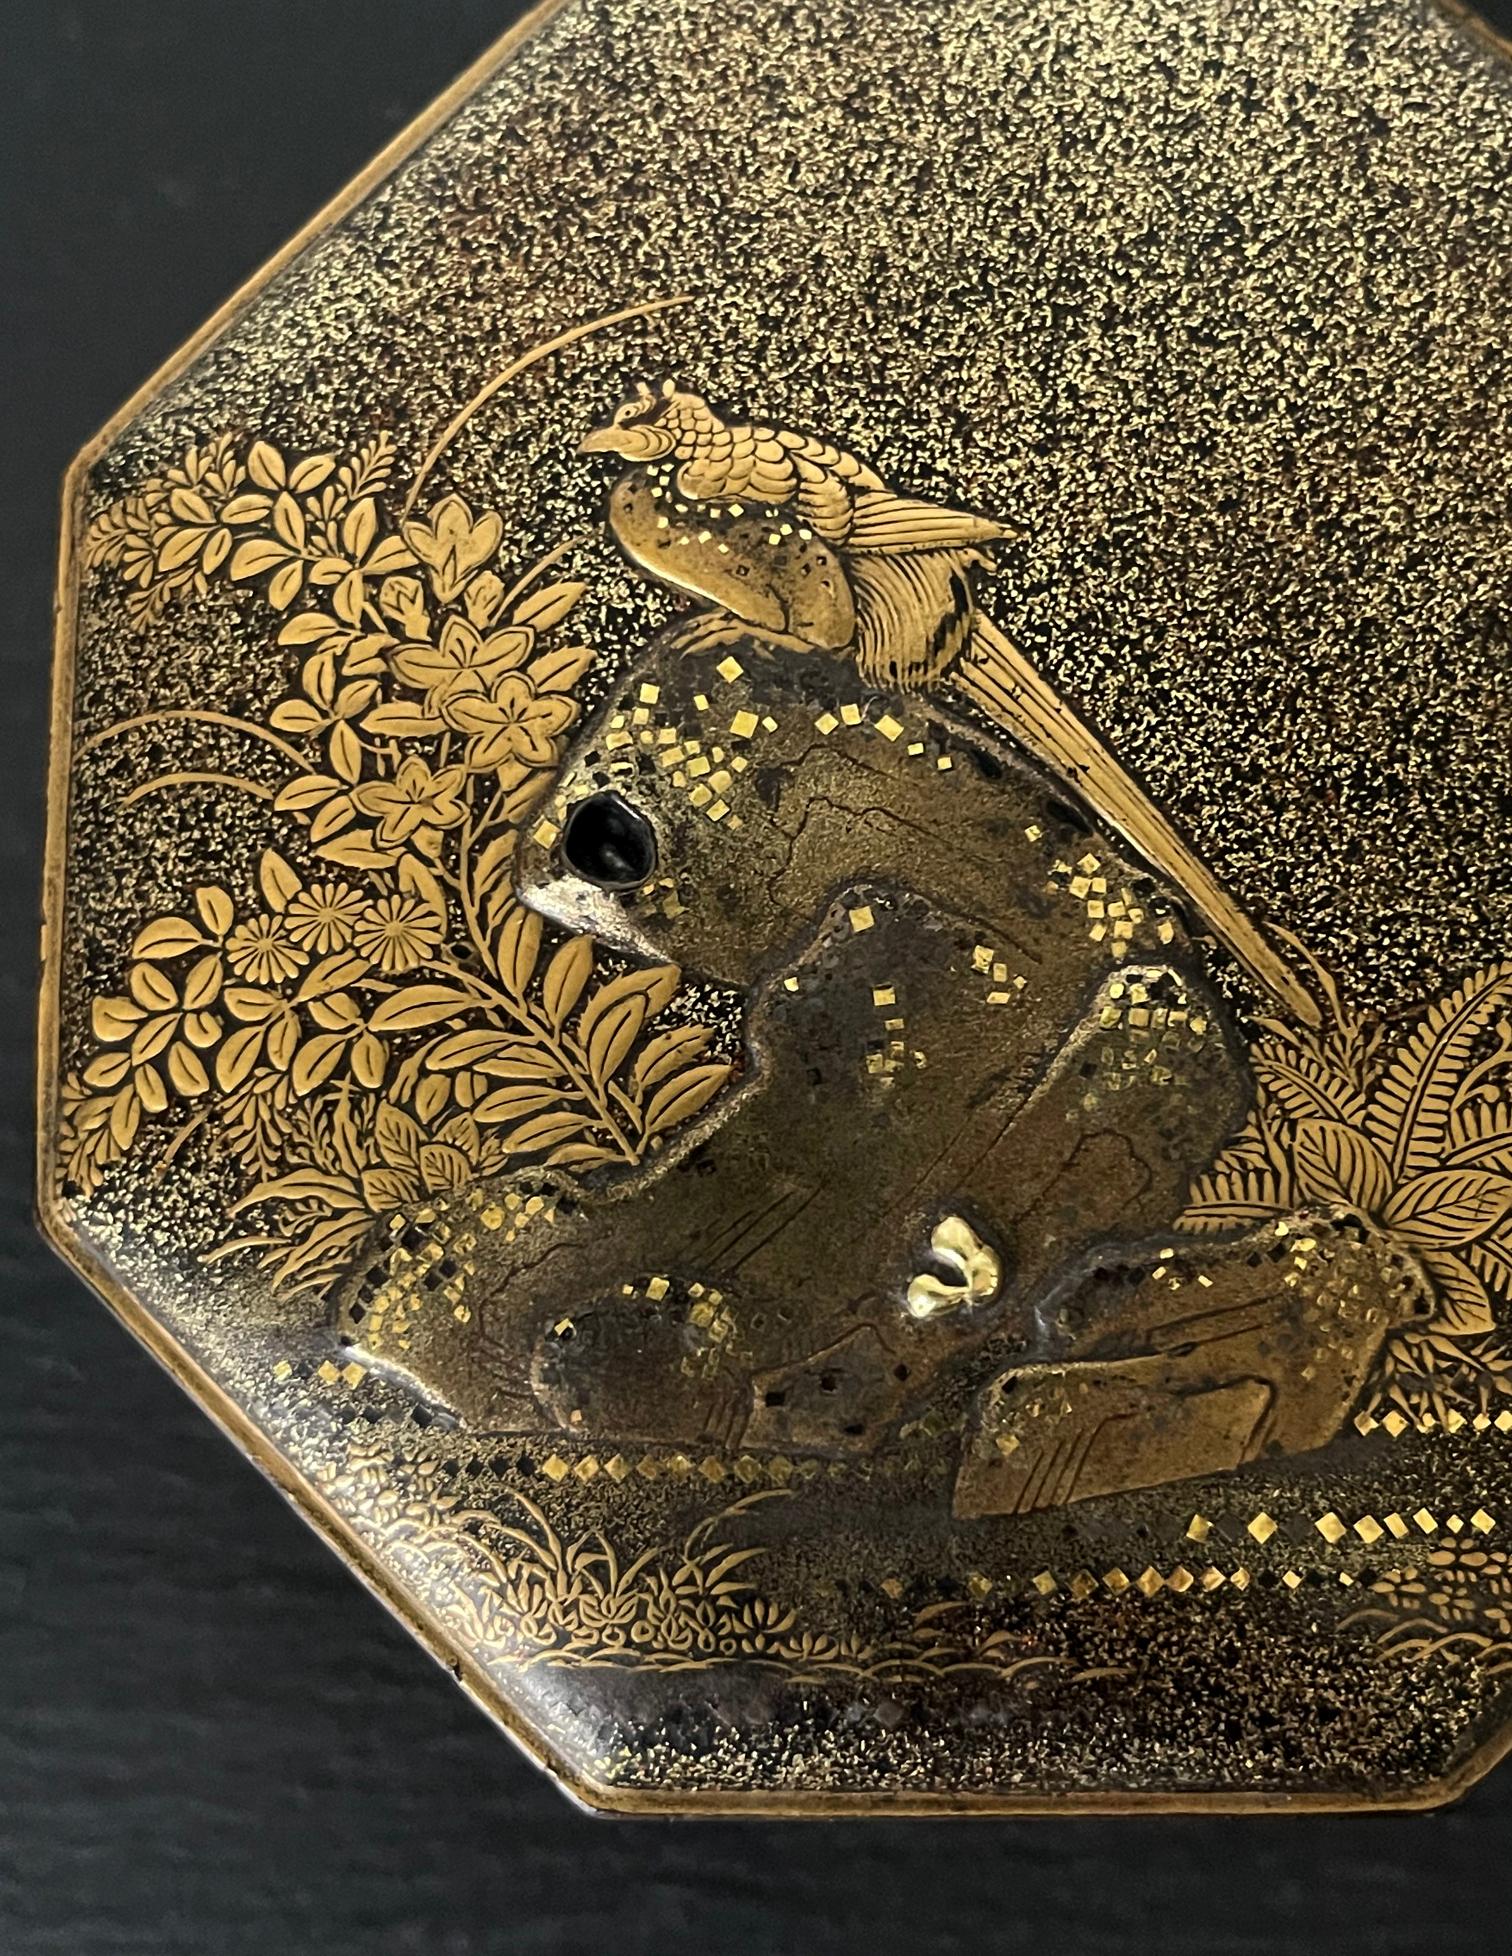 Exquisite Early Japanese Lacquer Kobako Box with Insert Tray 4